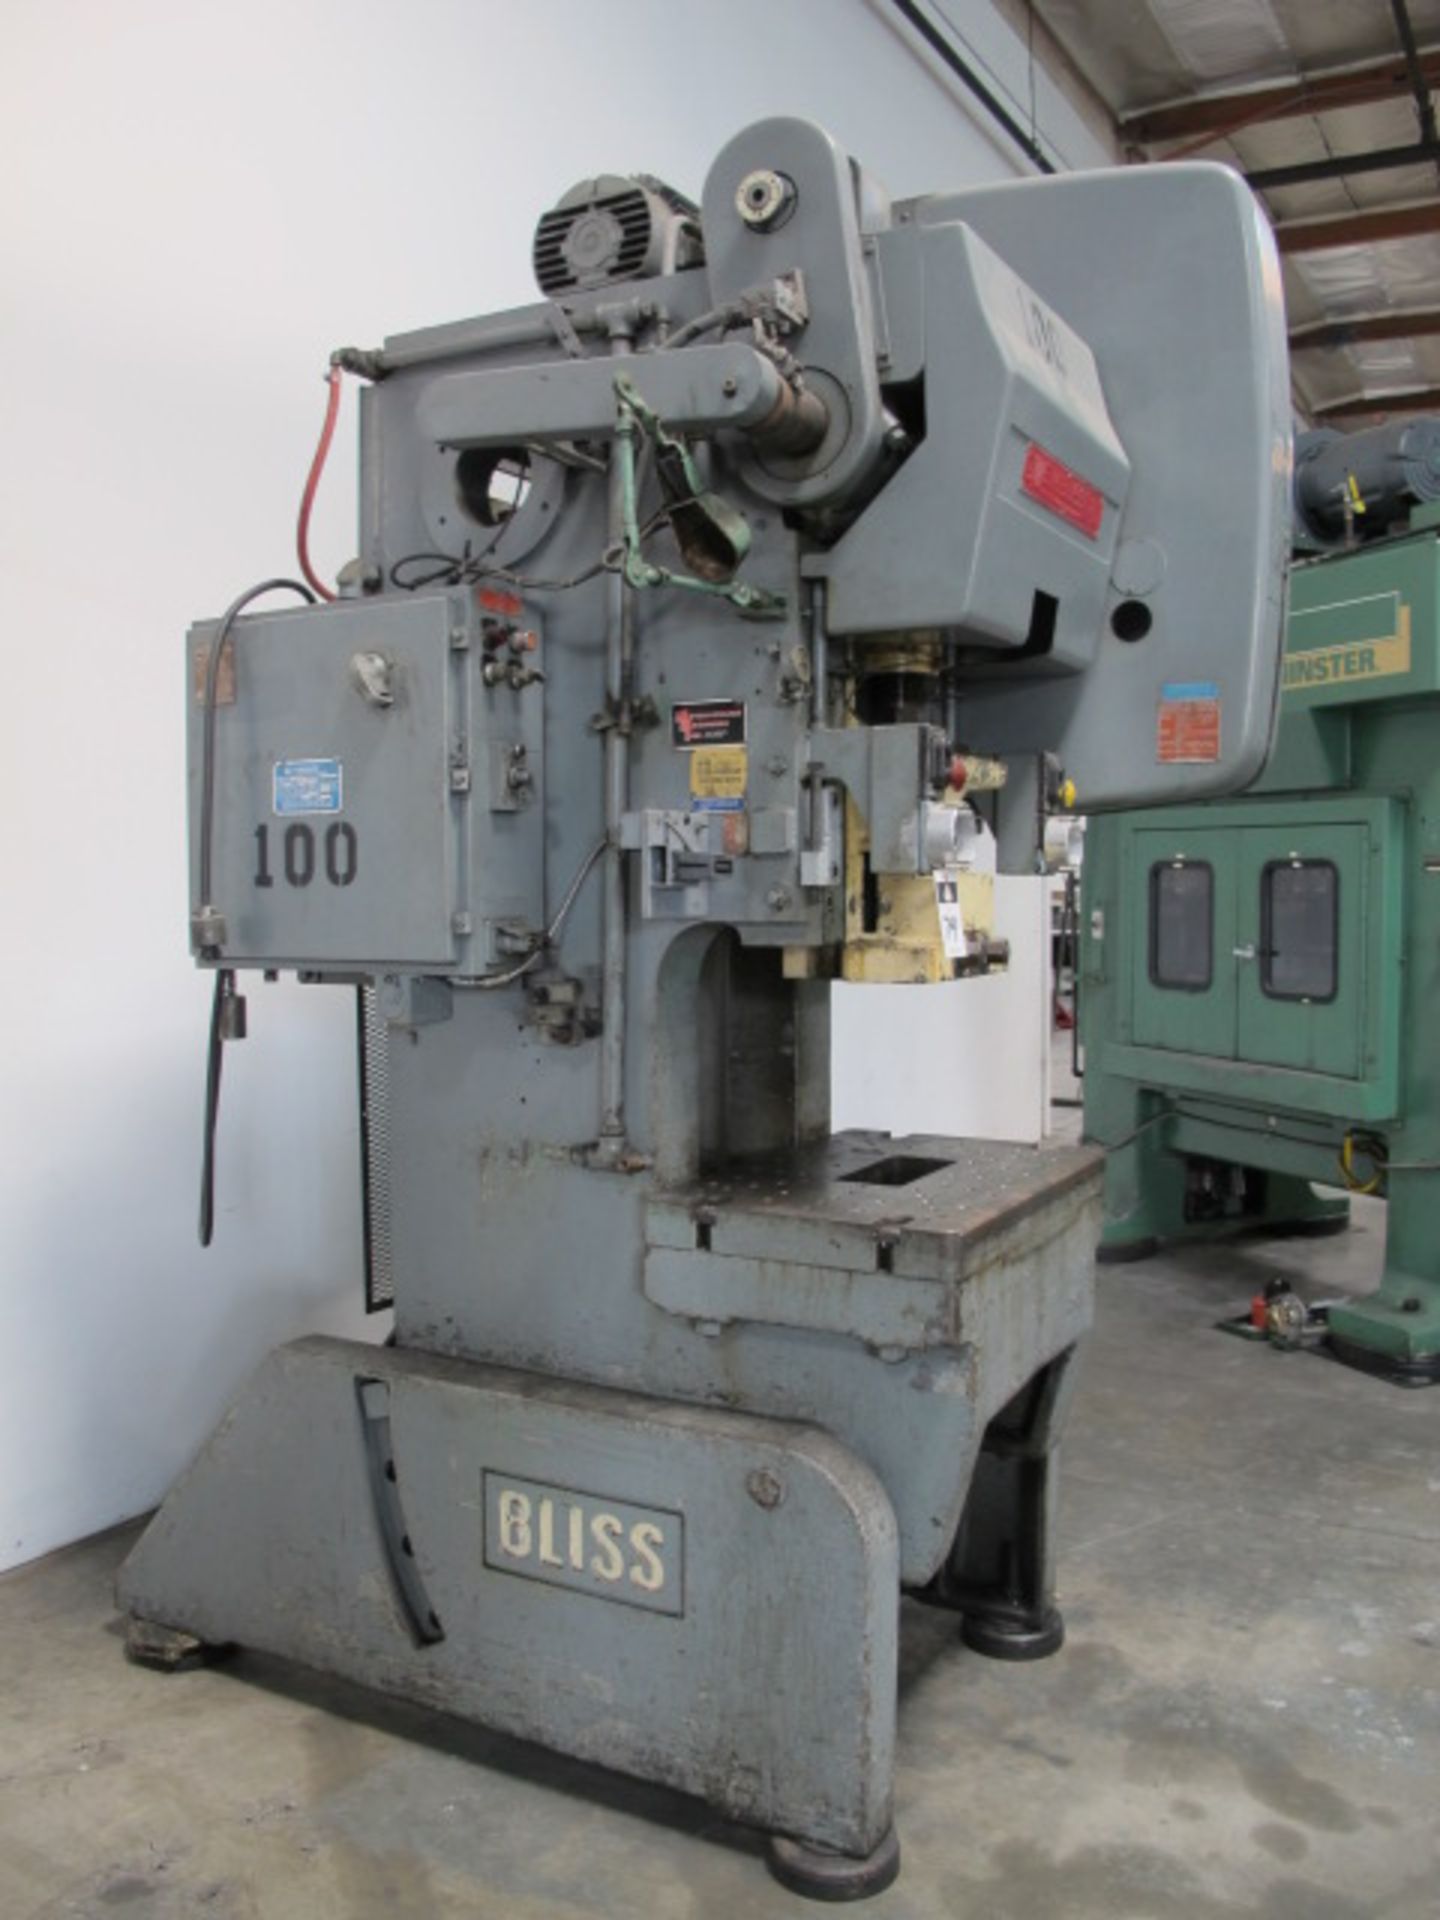 Bliss C-60 60-Ton OBI Stamping Press s/n H65677 w/ Pneumatic Clutch, 21” x 32” Bolster Area, 11” x - Image 3 of 7